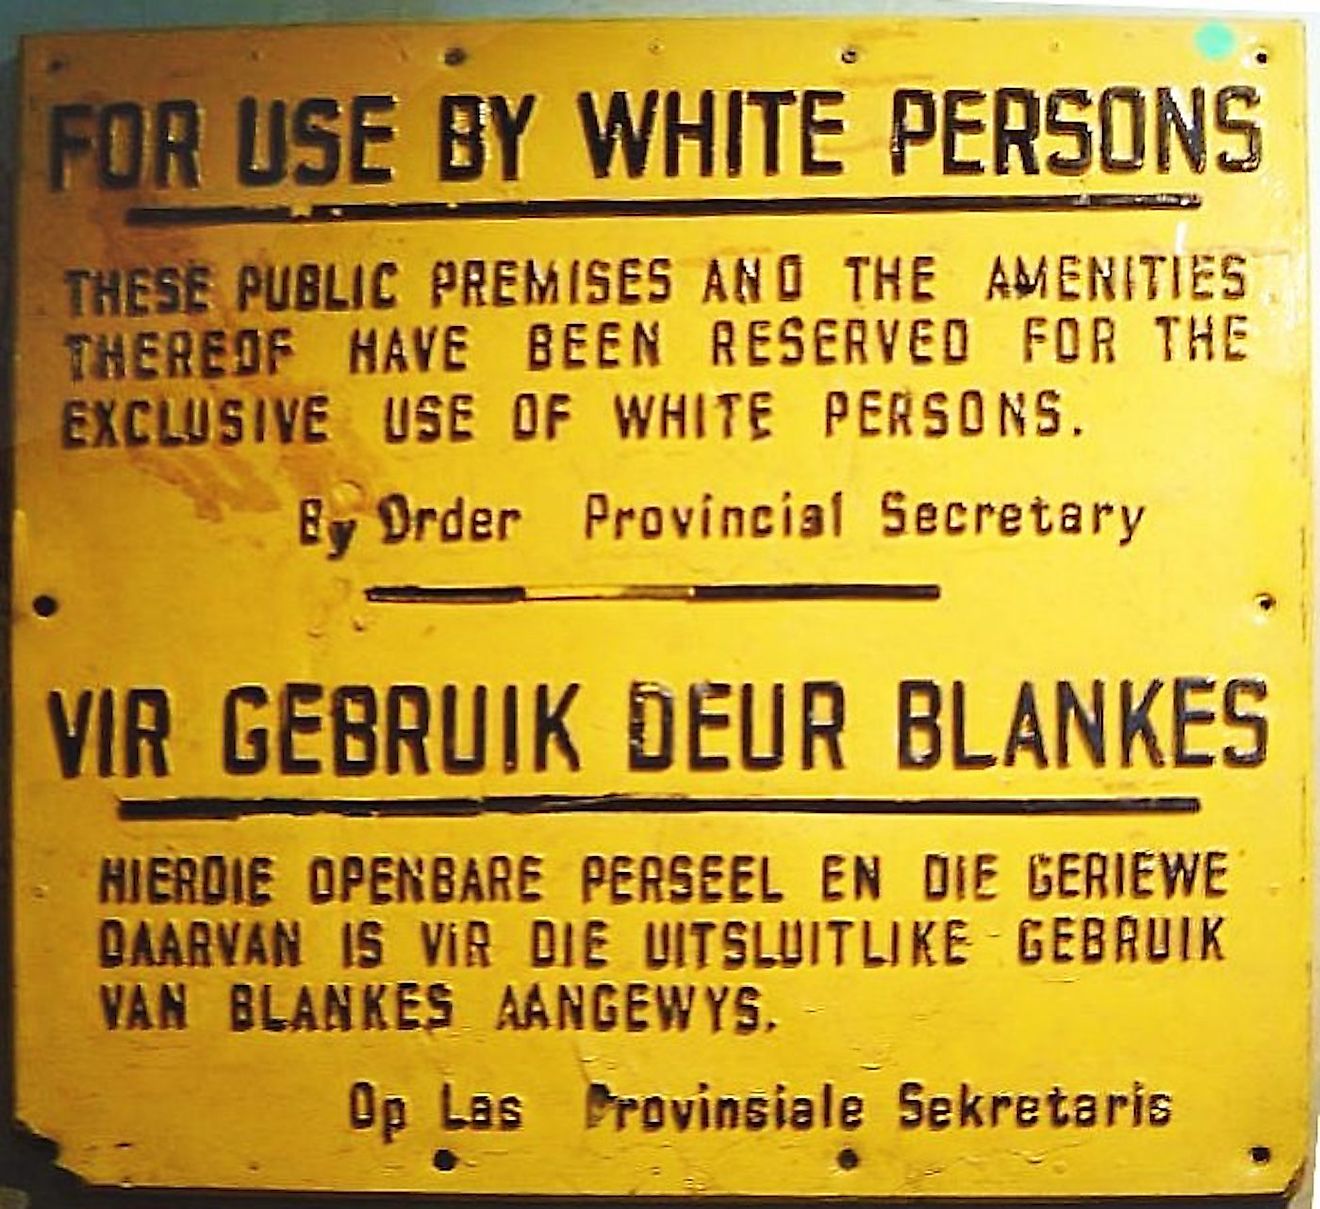 Sign from the Apartheid era in South Africa: Image credit: Dewet/Public domain